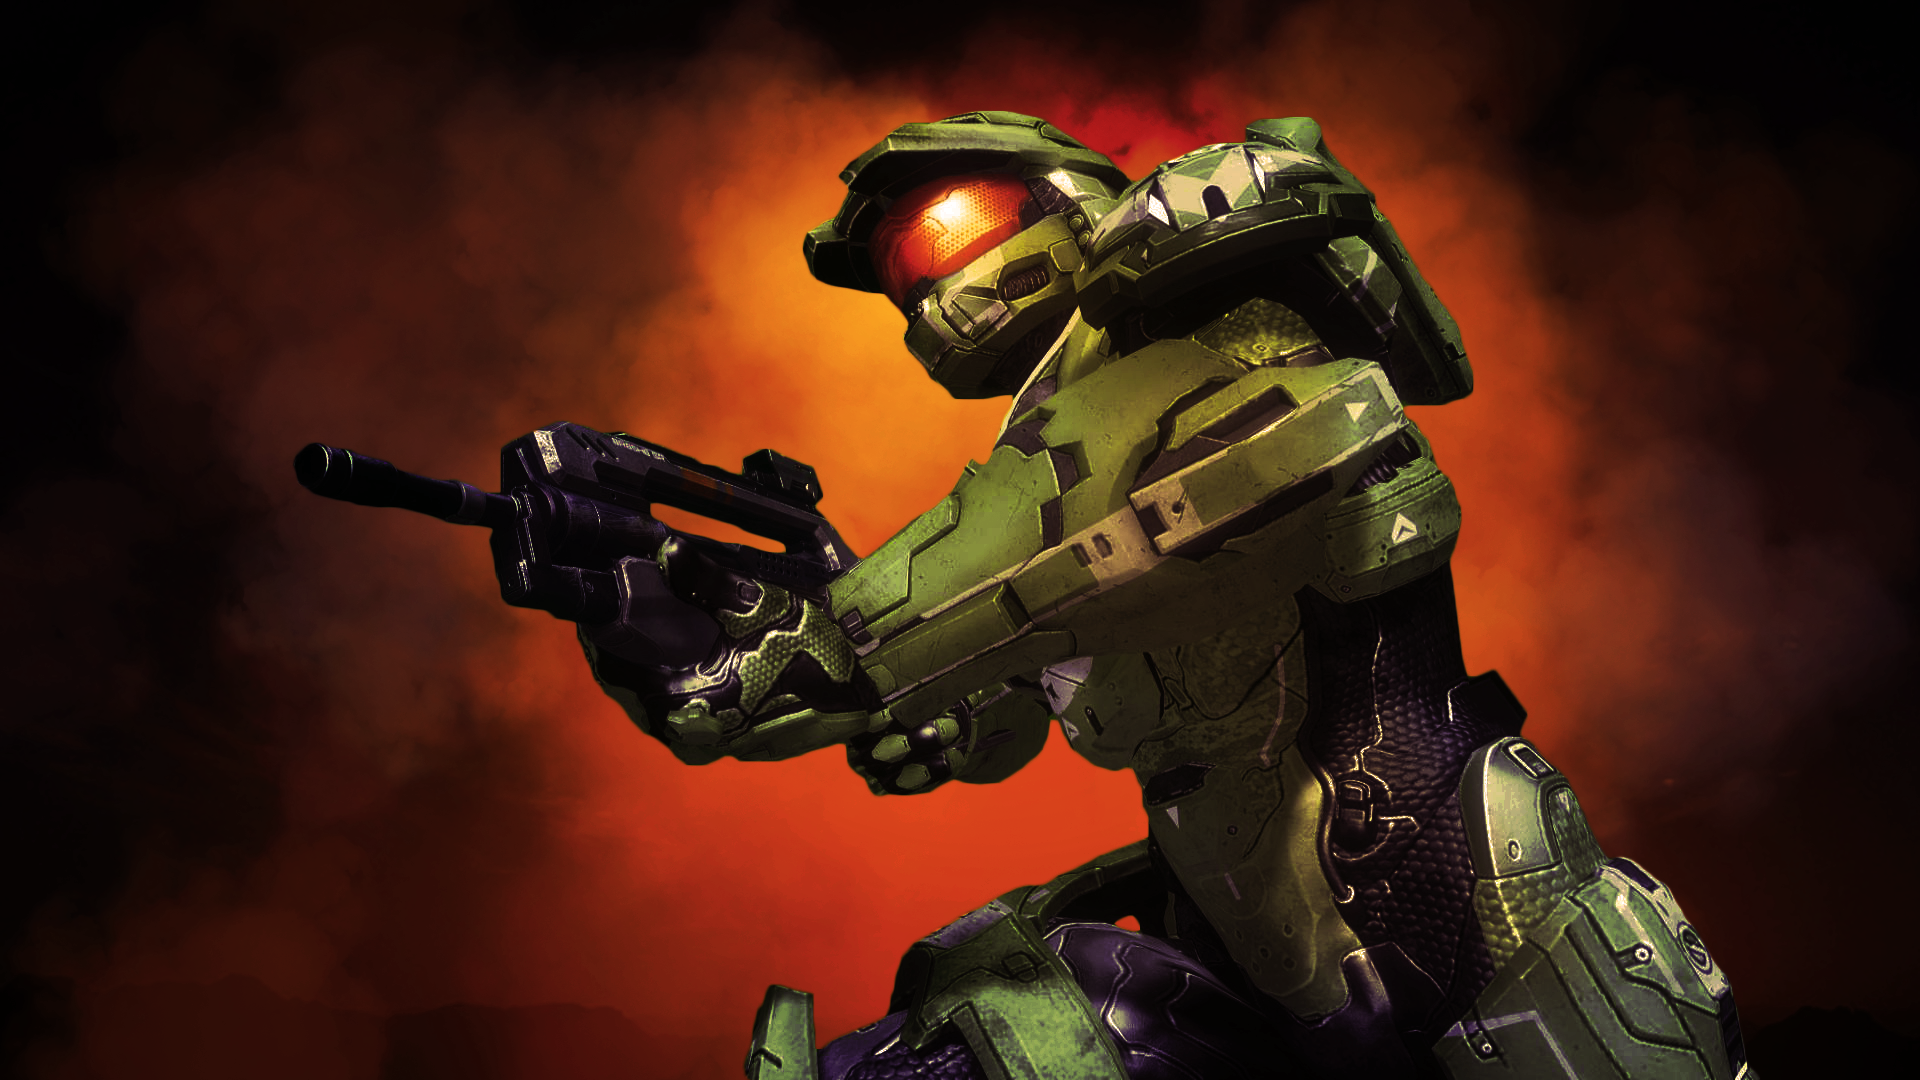 Halo 2 1920X1080 Wallpapers